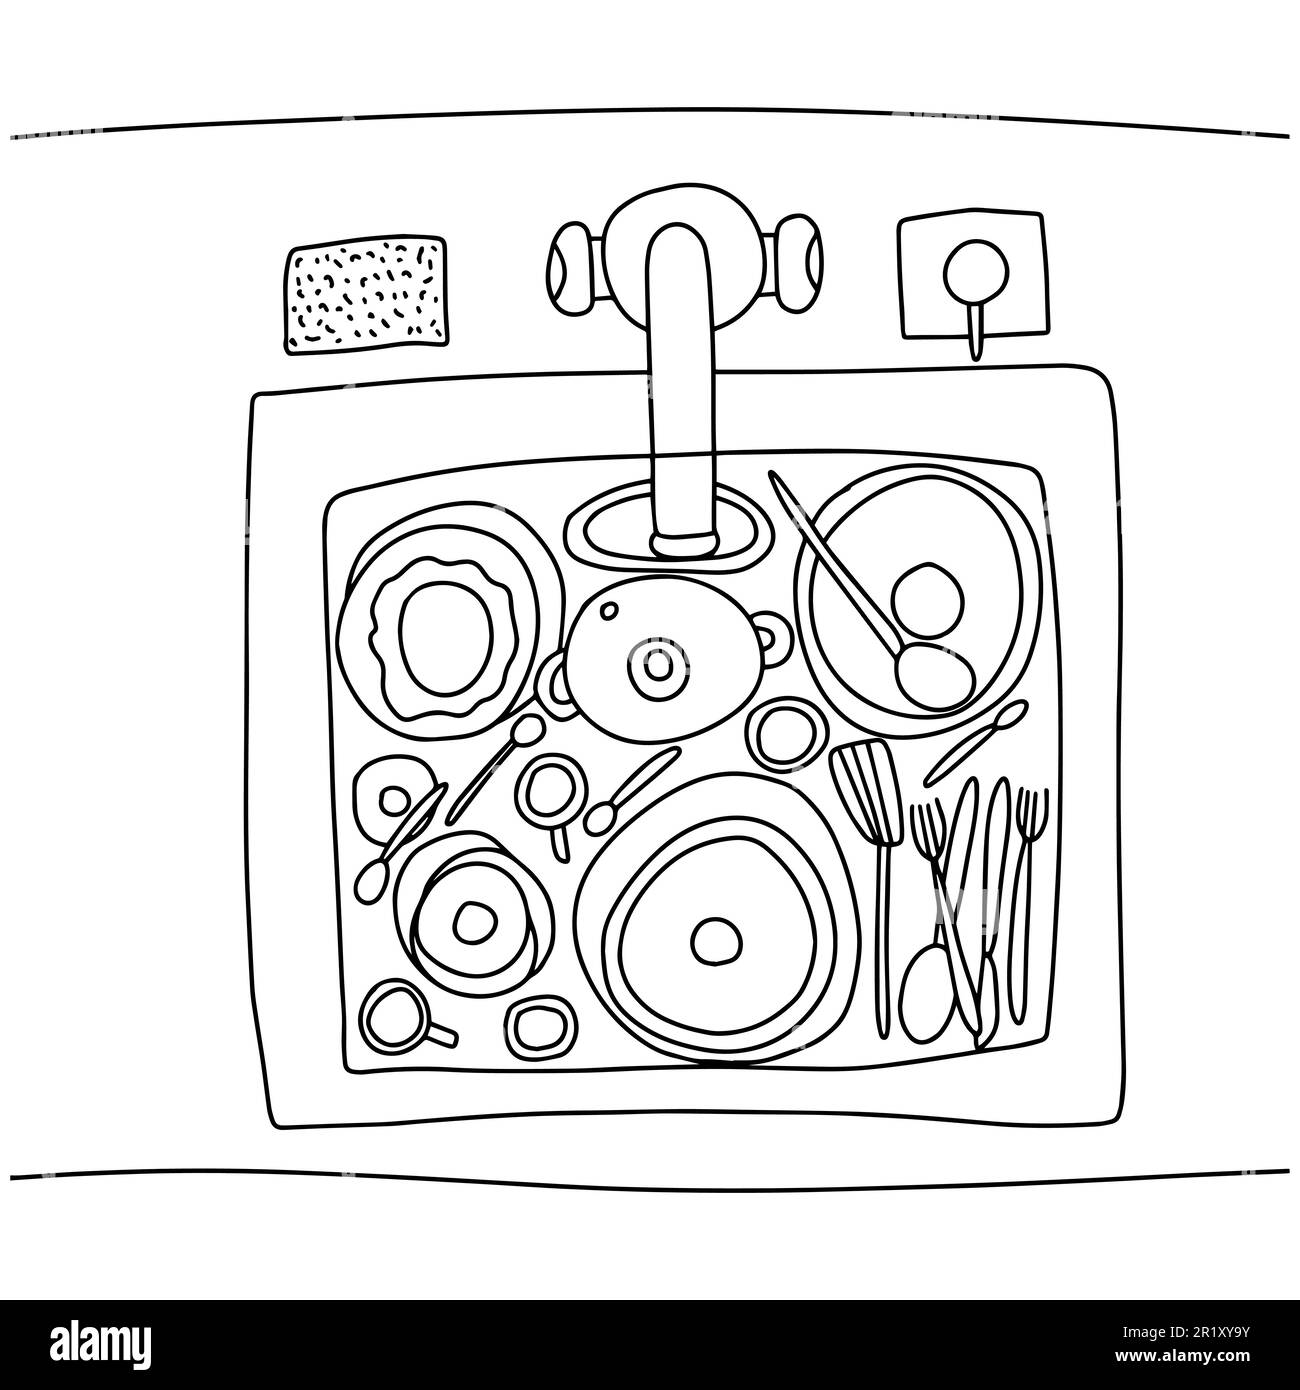 Coloring page with kitchen sink Stock Vector